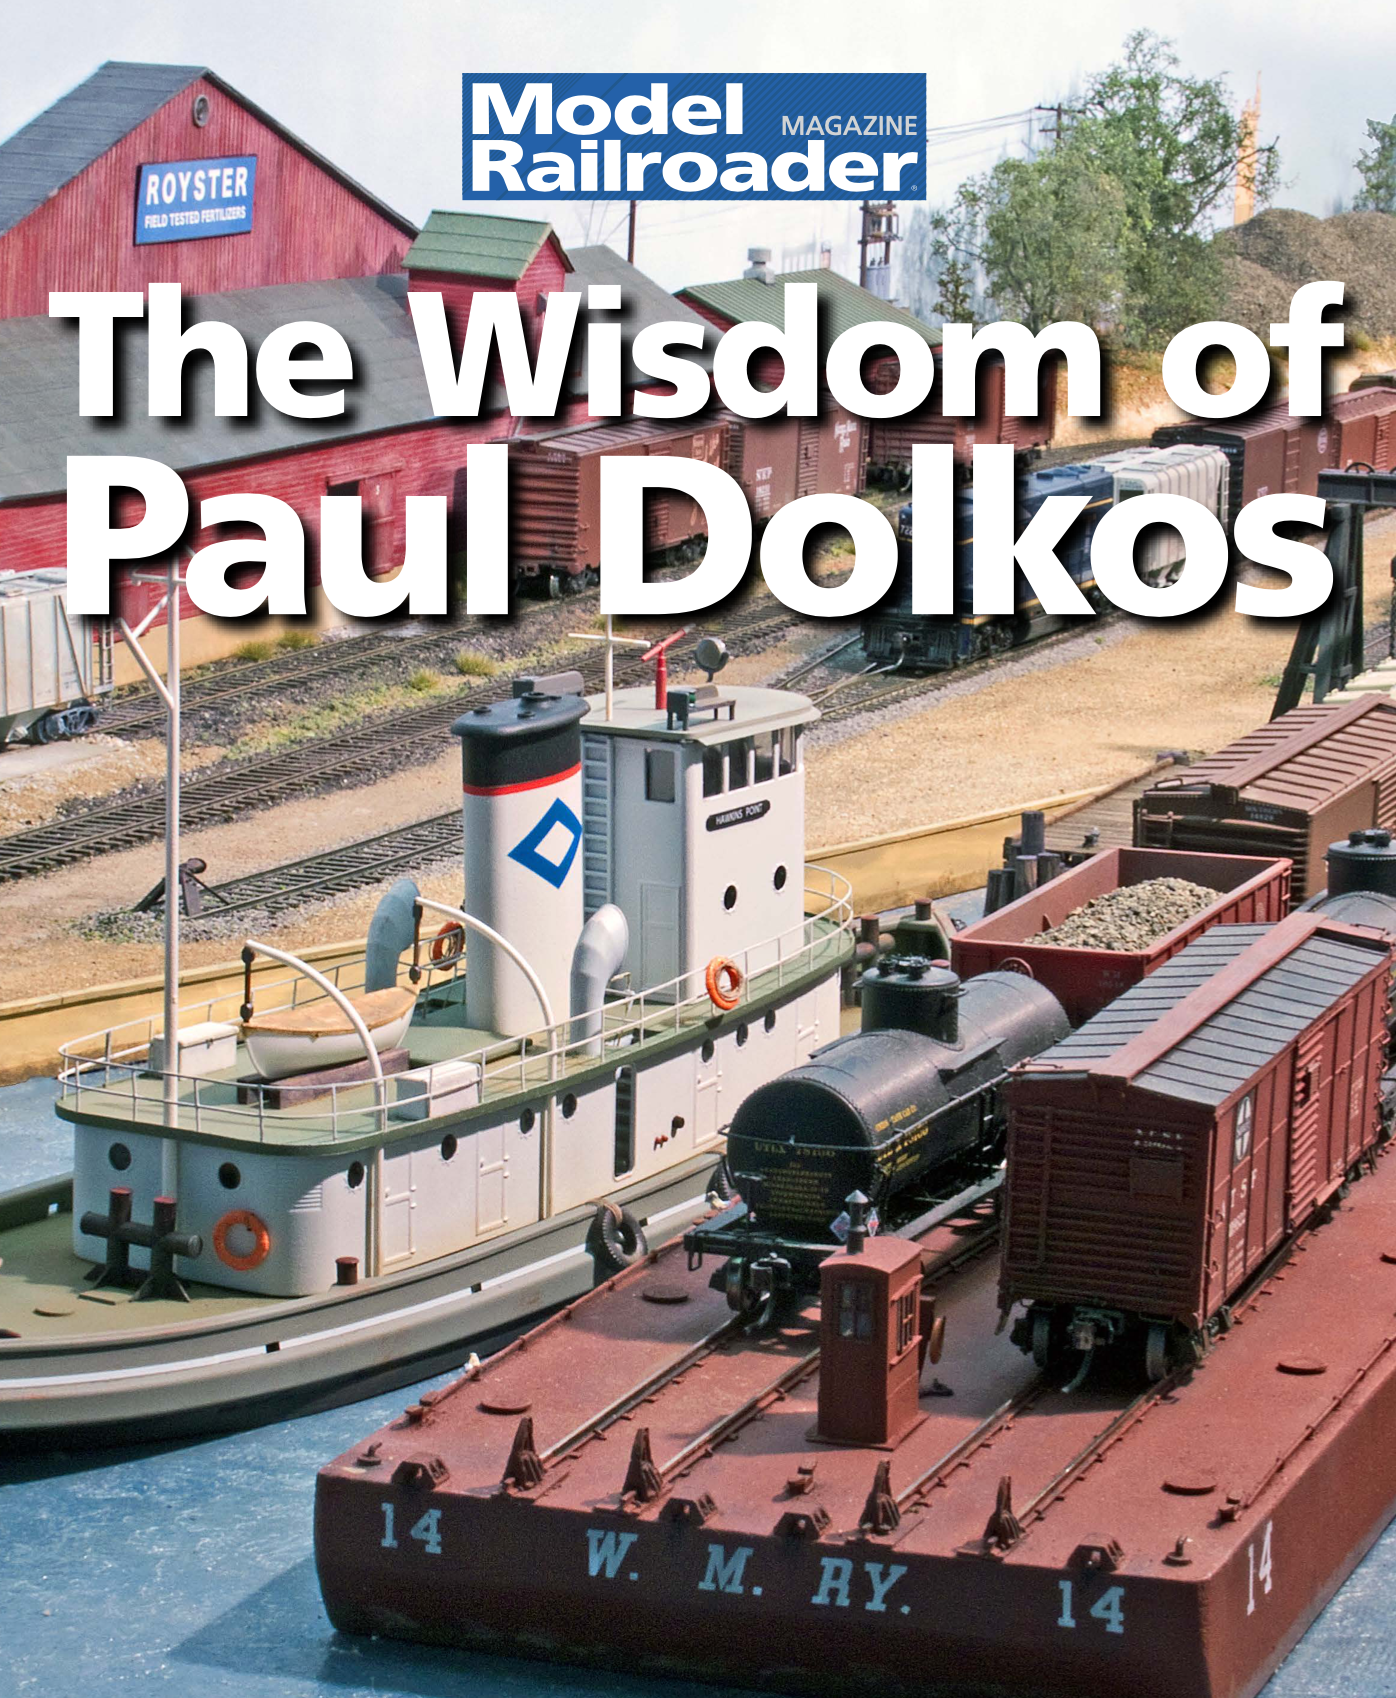 Tug boat and rail barge with text headline: the Wisdom of Paul Dolkos and the Model Railroader blue and white logo.